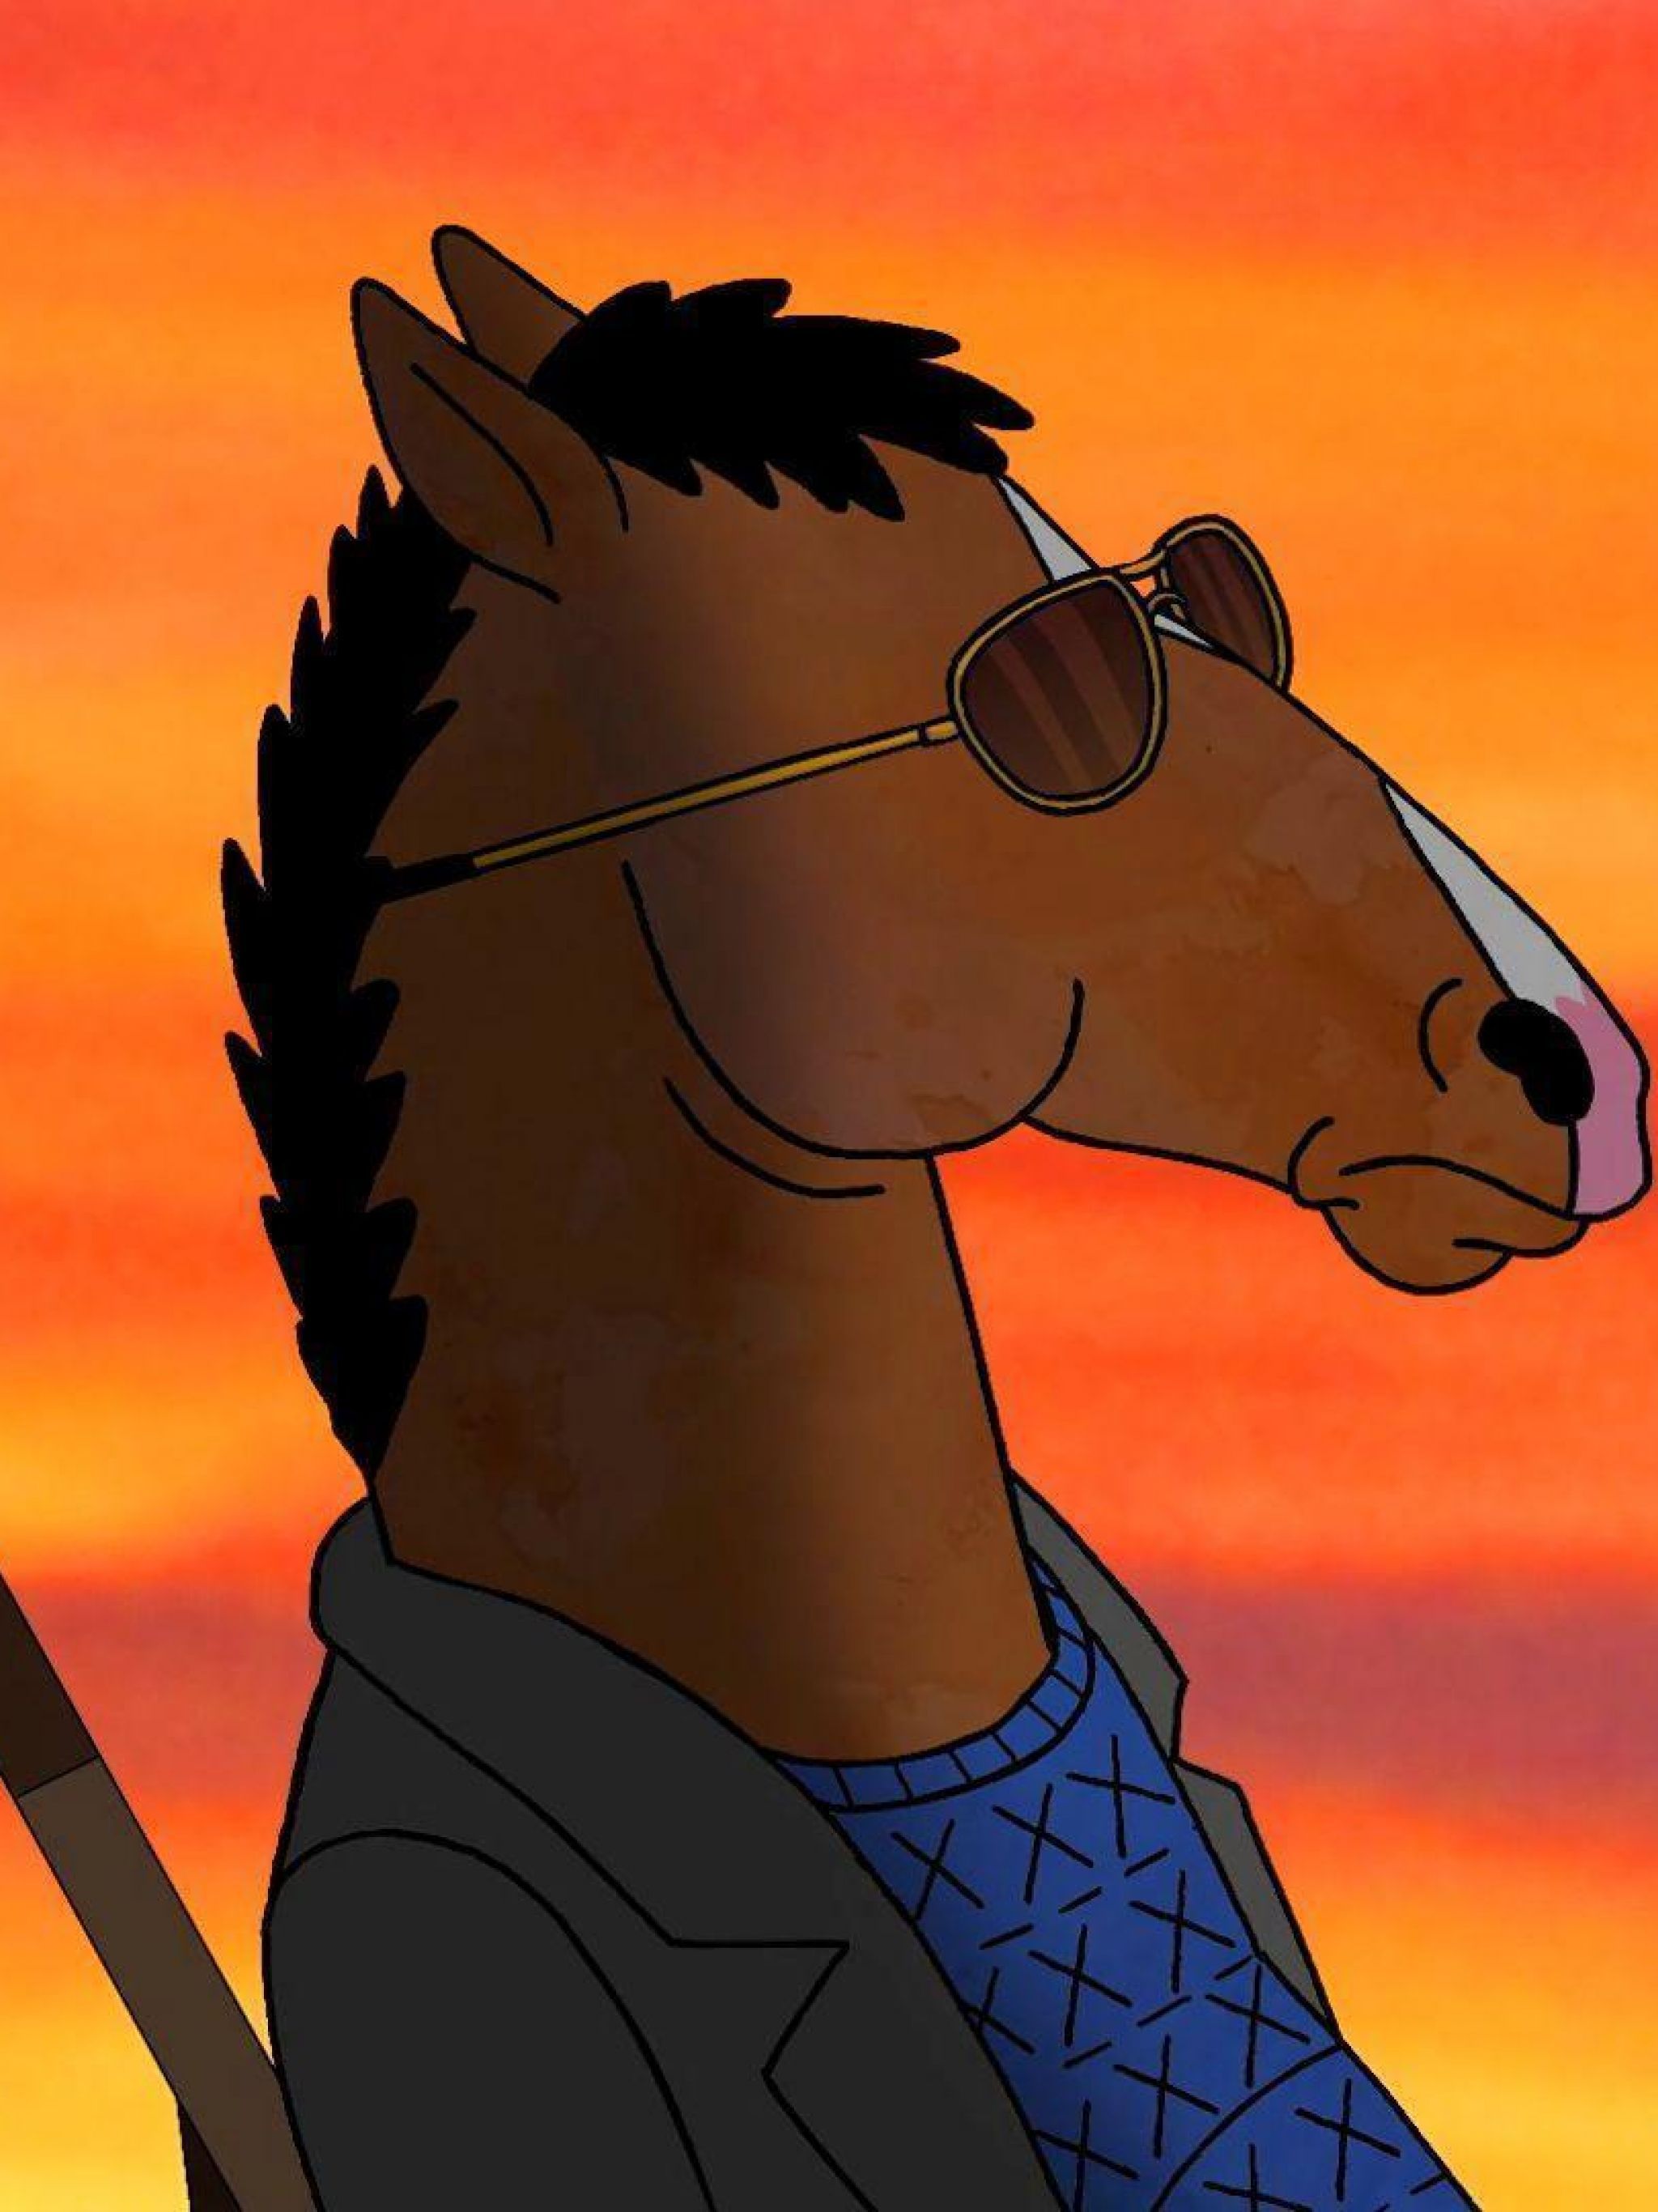 Bojack Horseman Wallpaper Bojack Horseman Wallpaper Wallpapers Background Hollywoo Season Backgrounds Desktop Tv Show 4k Star Quotes Fanpop 1920 Monitor Dual Wallpaperaccess Wall